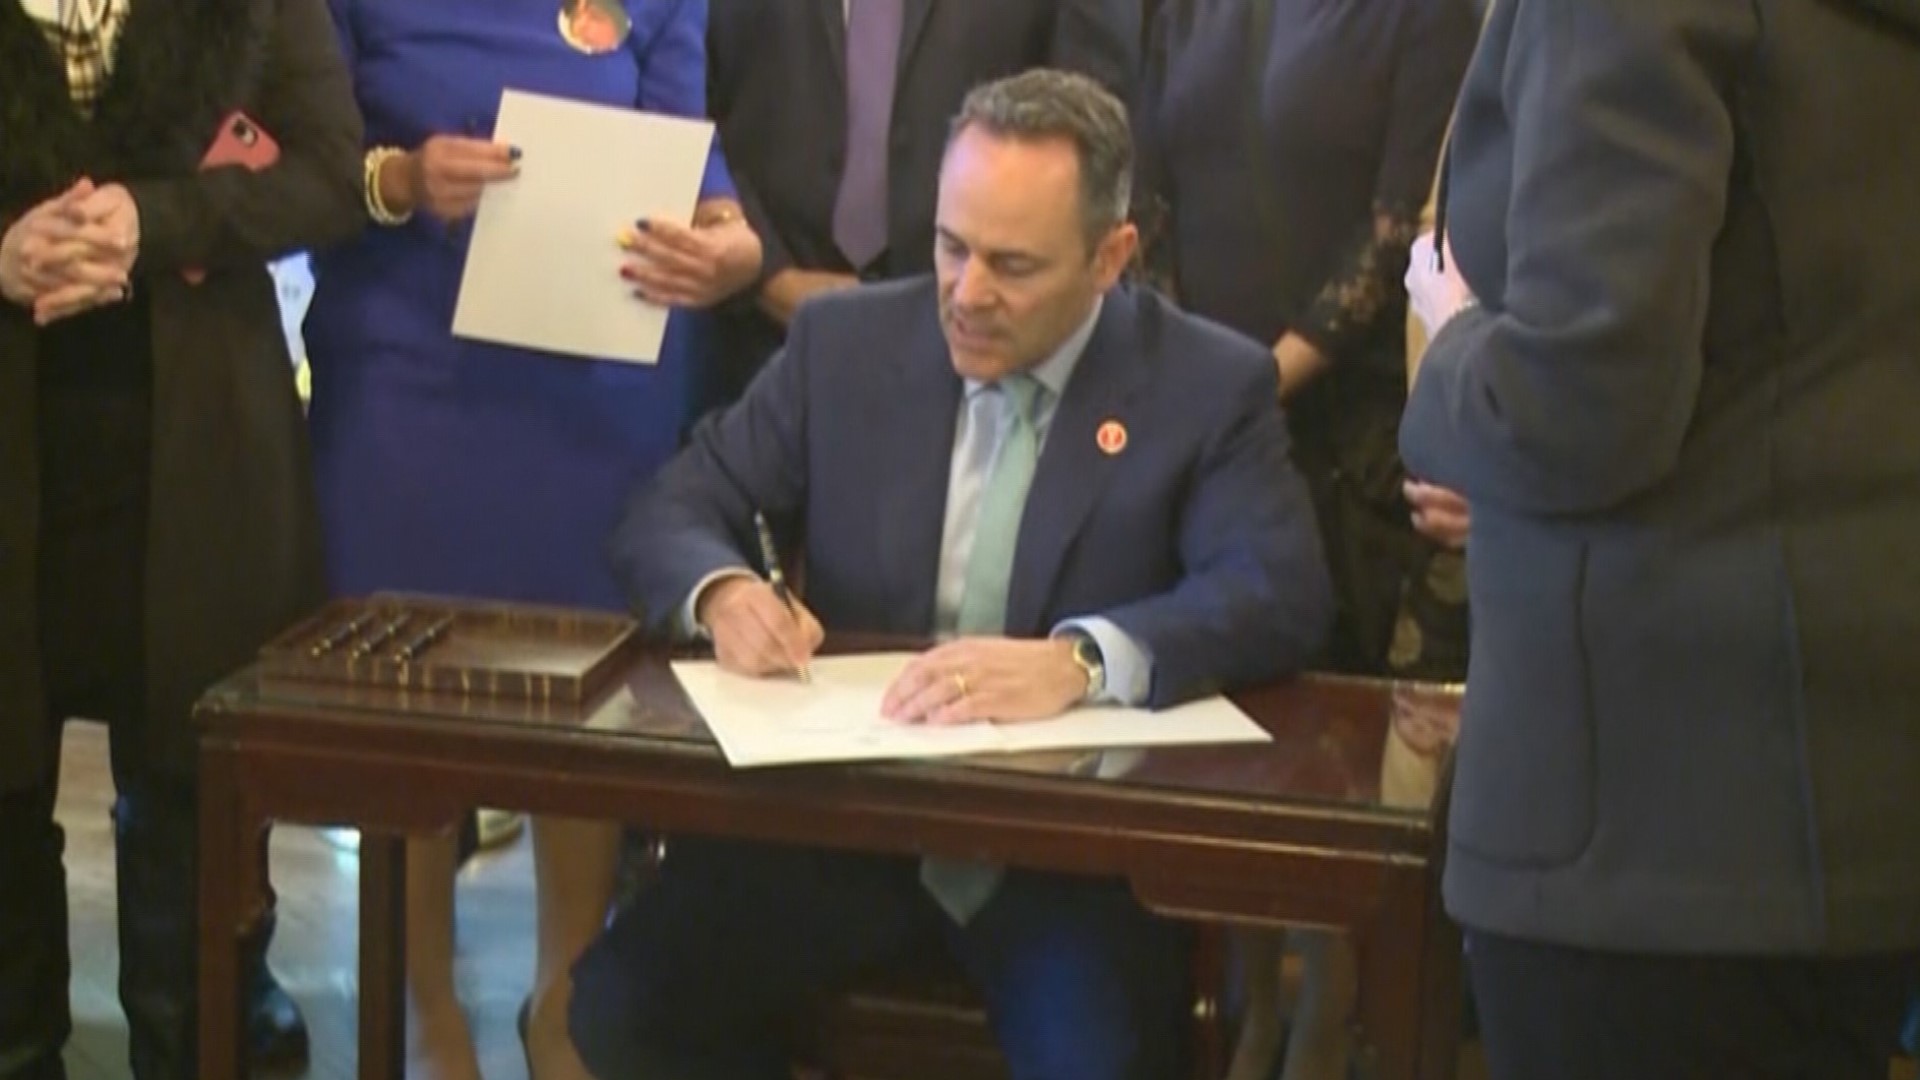 On March 5, Governor Matt Bevin signed the legislation creating a single sign-on system for organ donation.